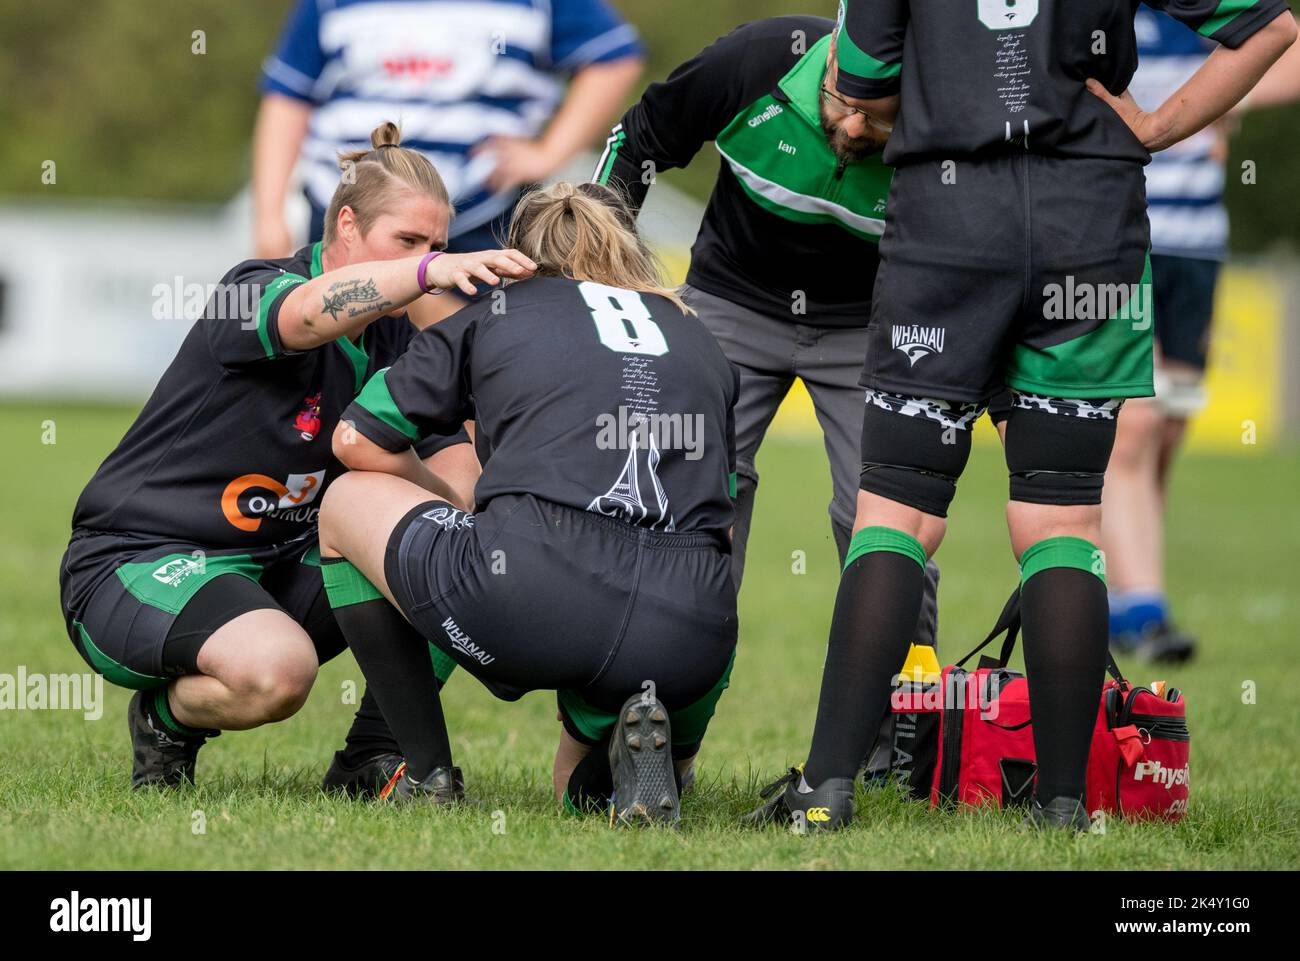 English womens amateur Rugby Union players playing in a league game and recieving medical care. Stock Photo